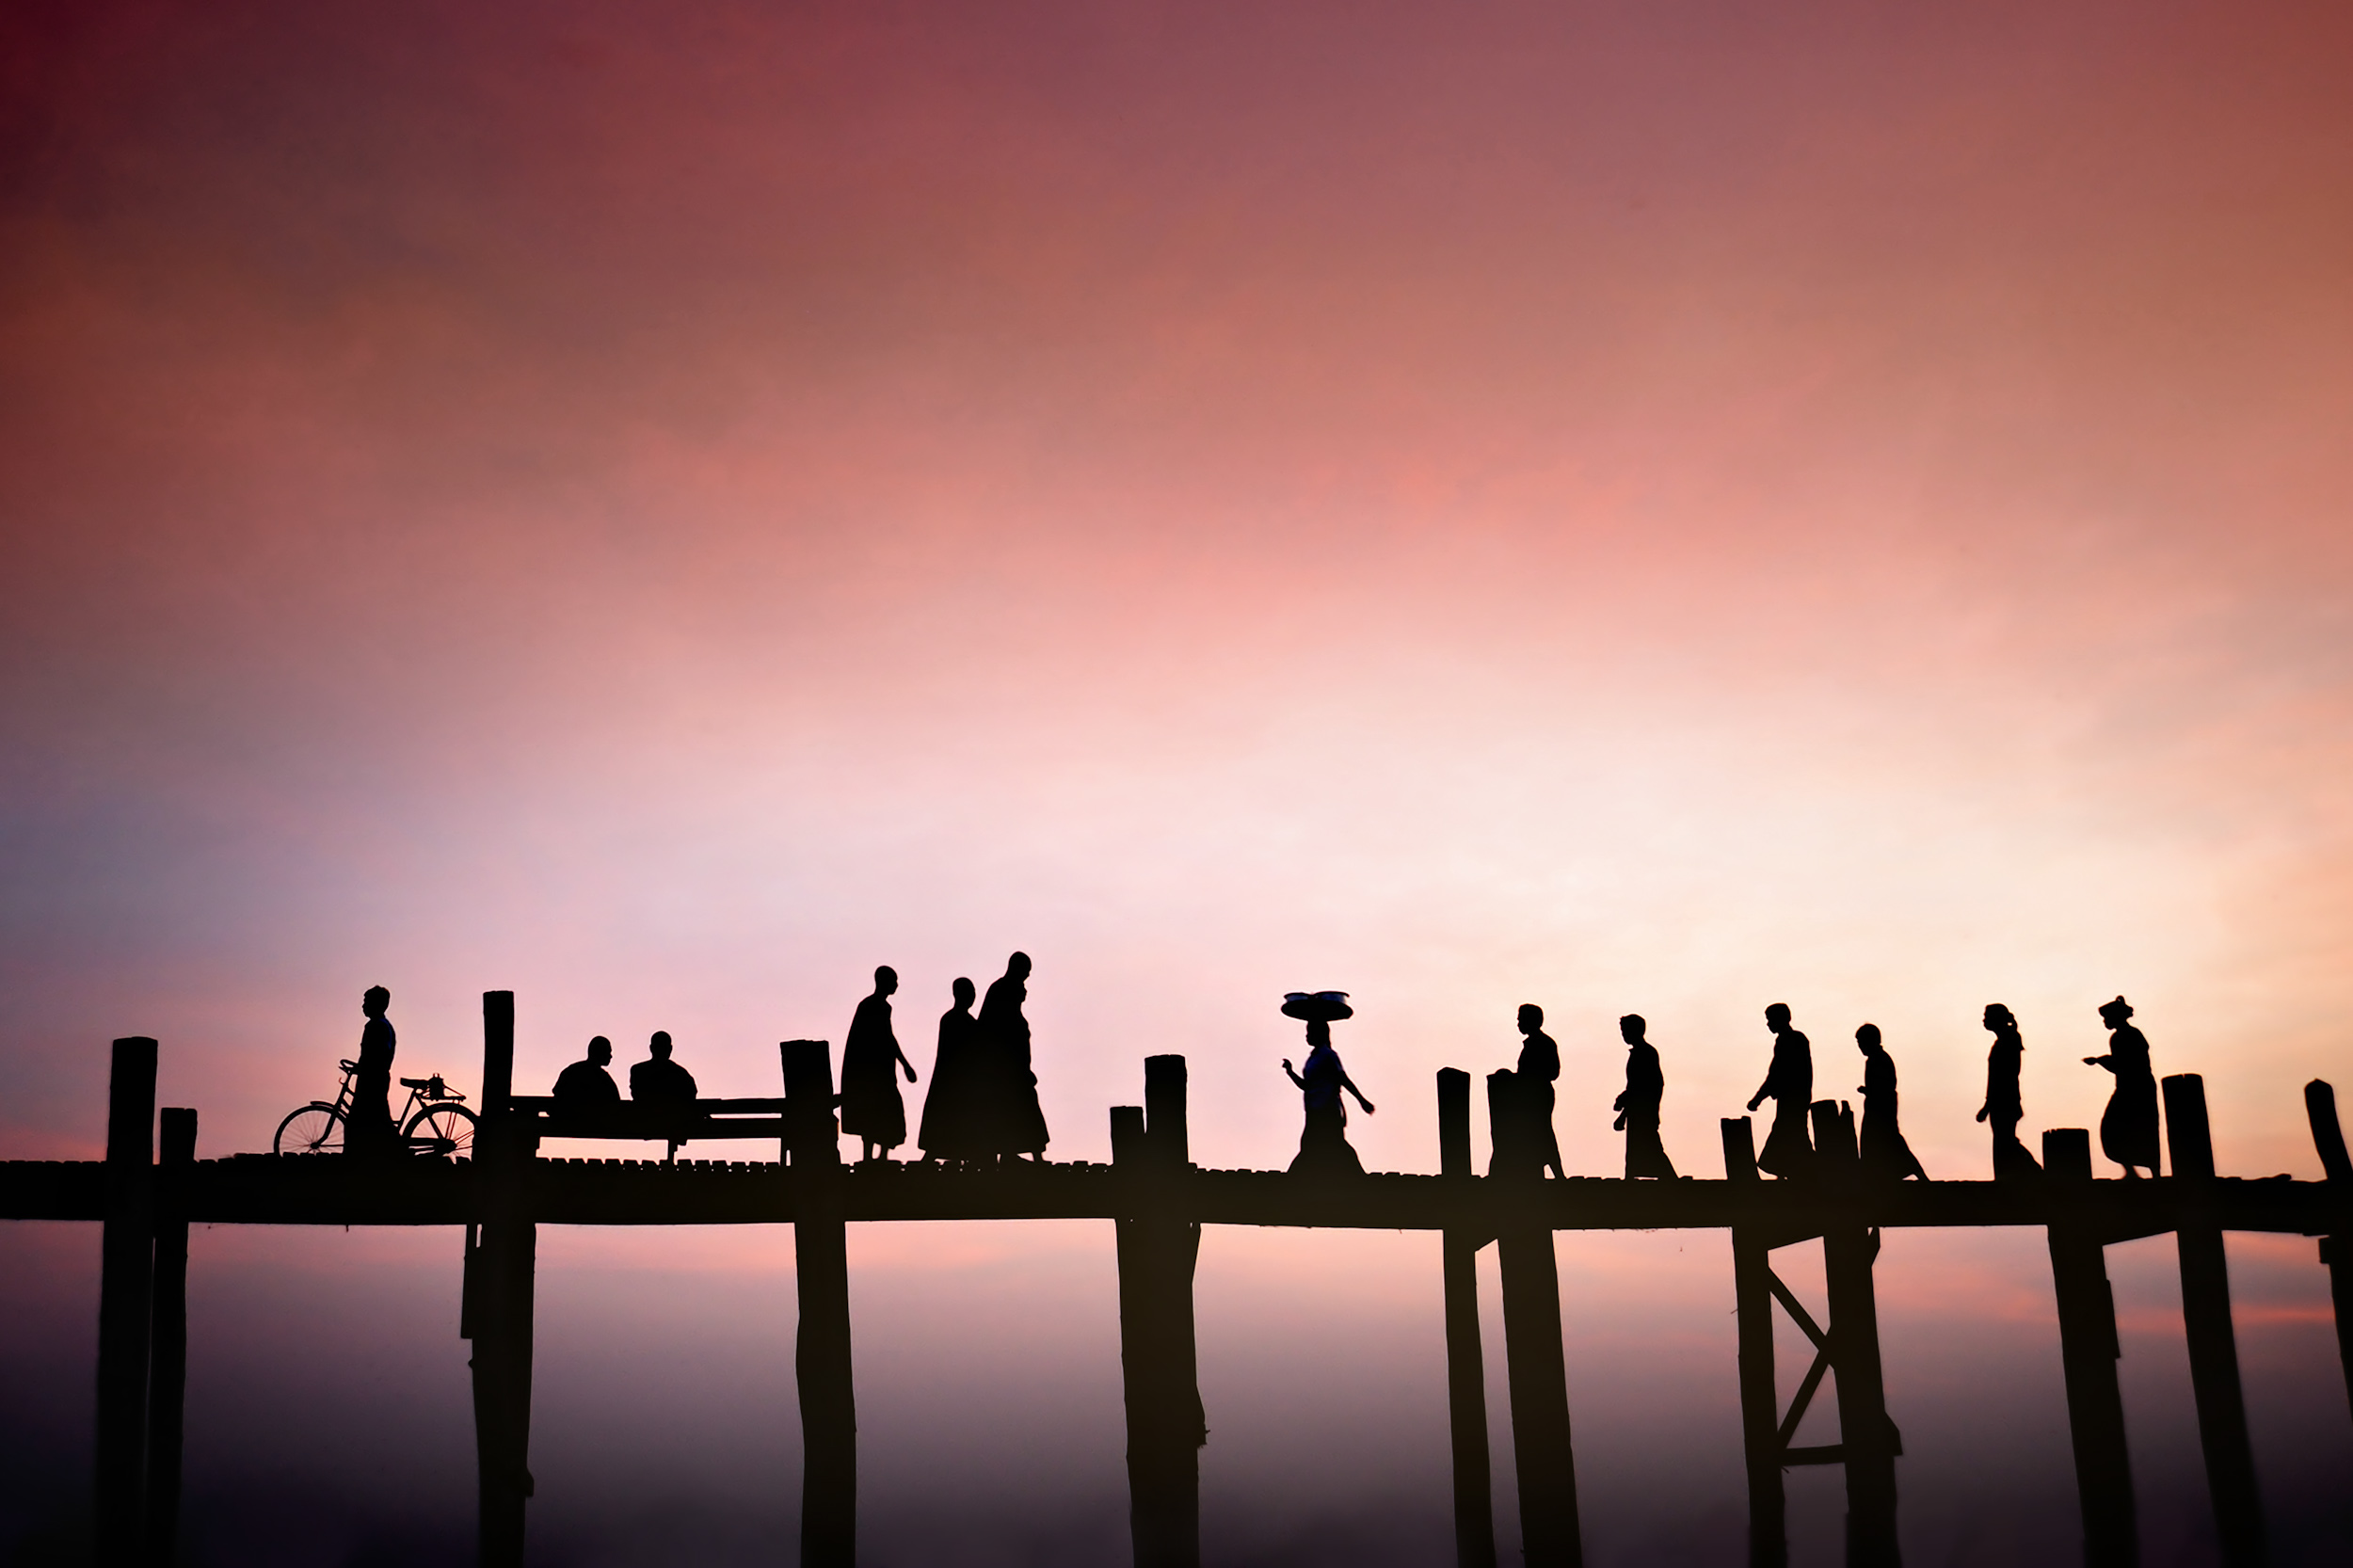 Silhouettes of multiple people crossing a wooden bridge on tree trunk poles at sunset